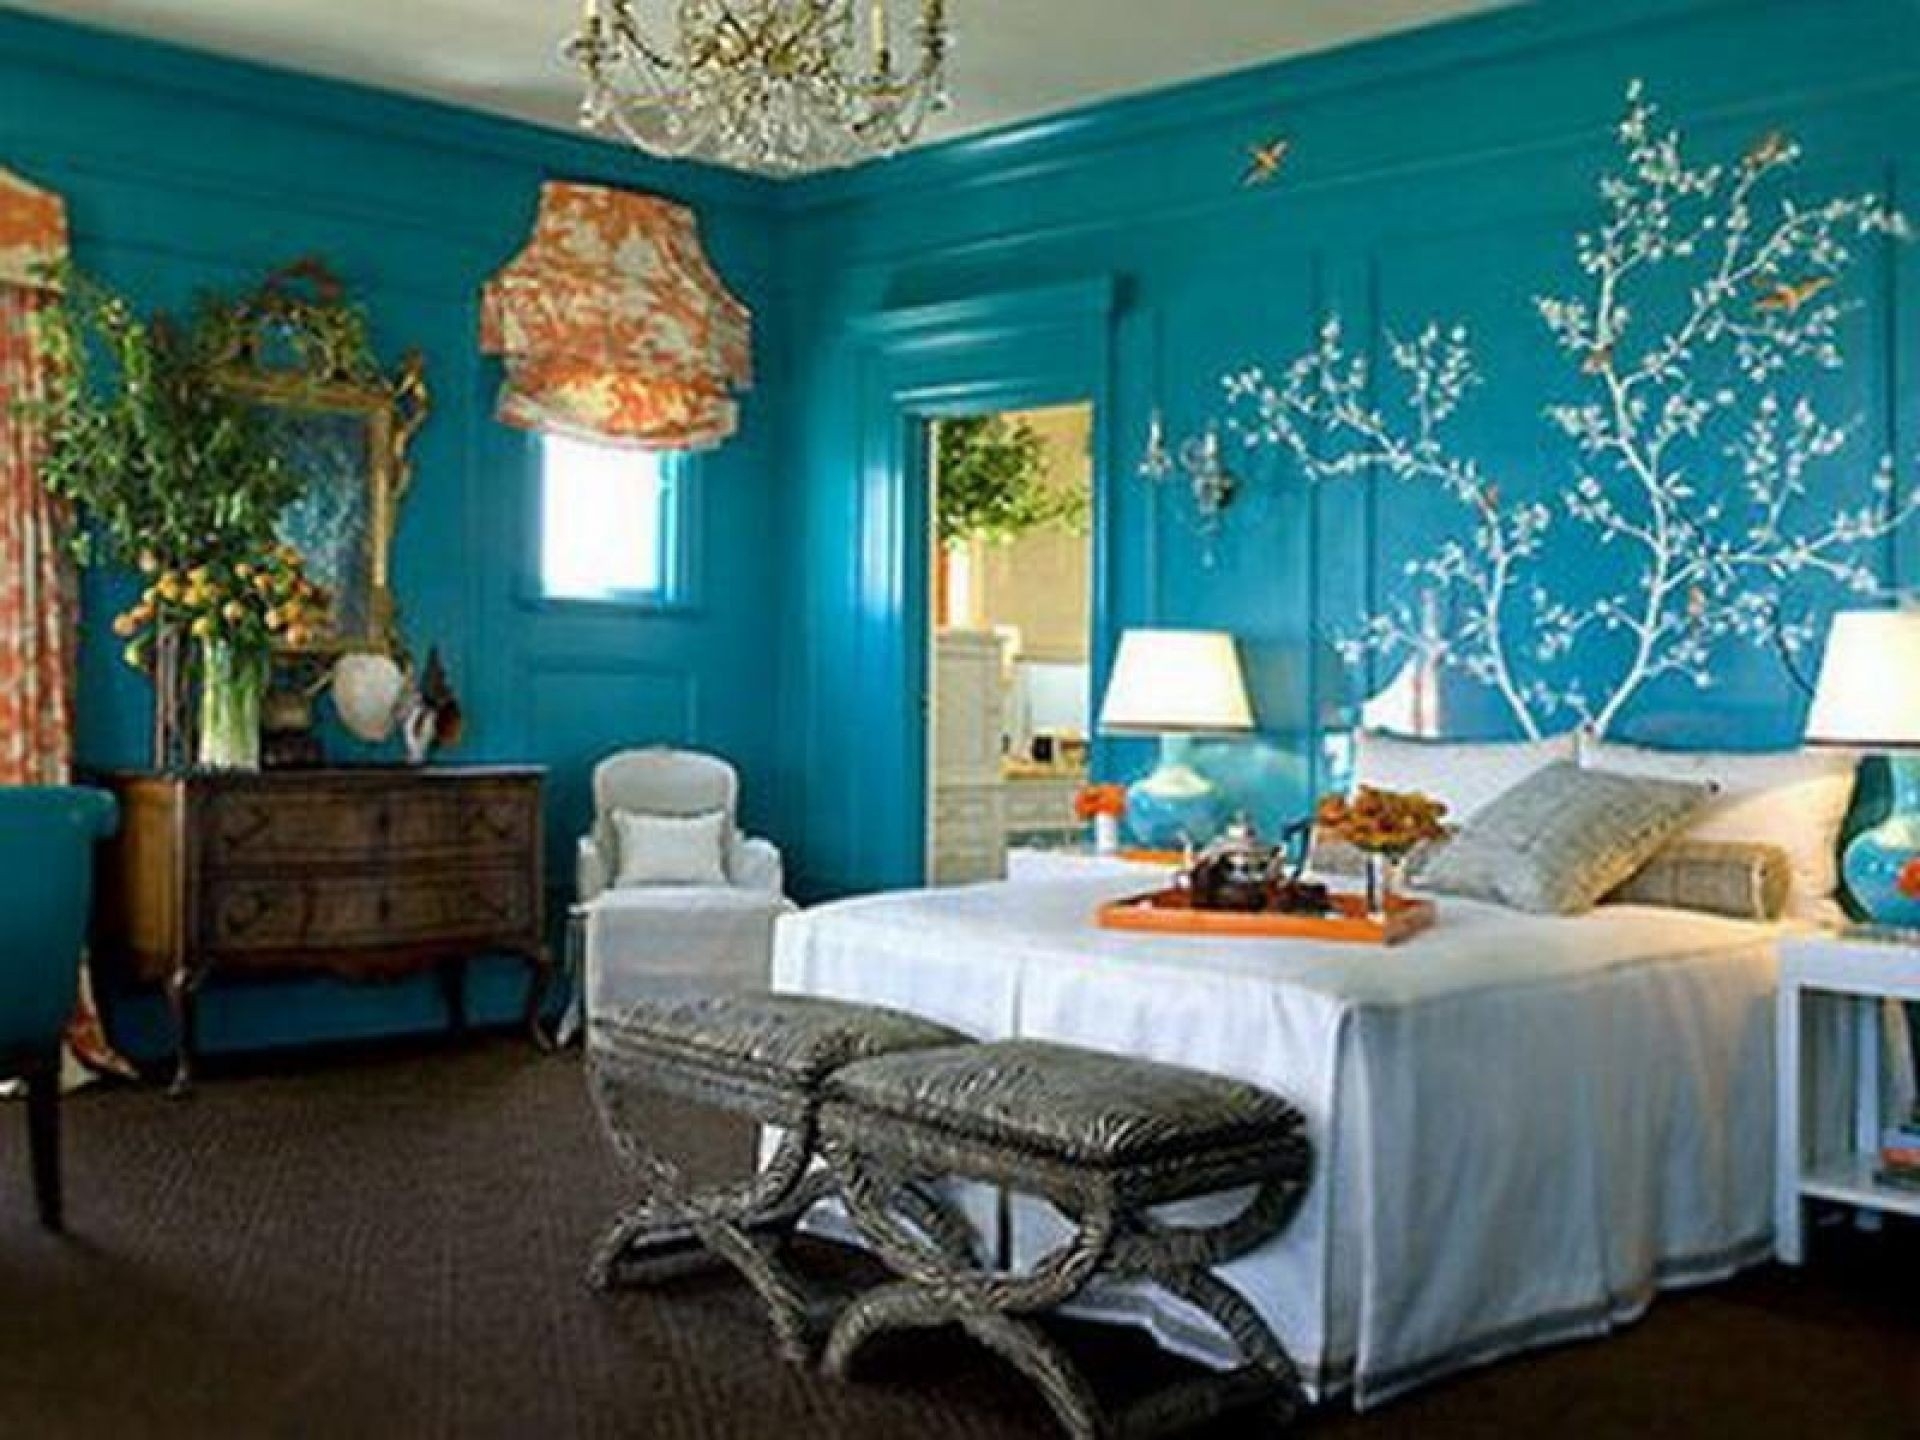 Female Young Adult Bedroom Ideas